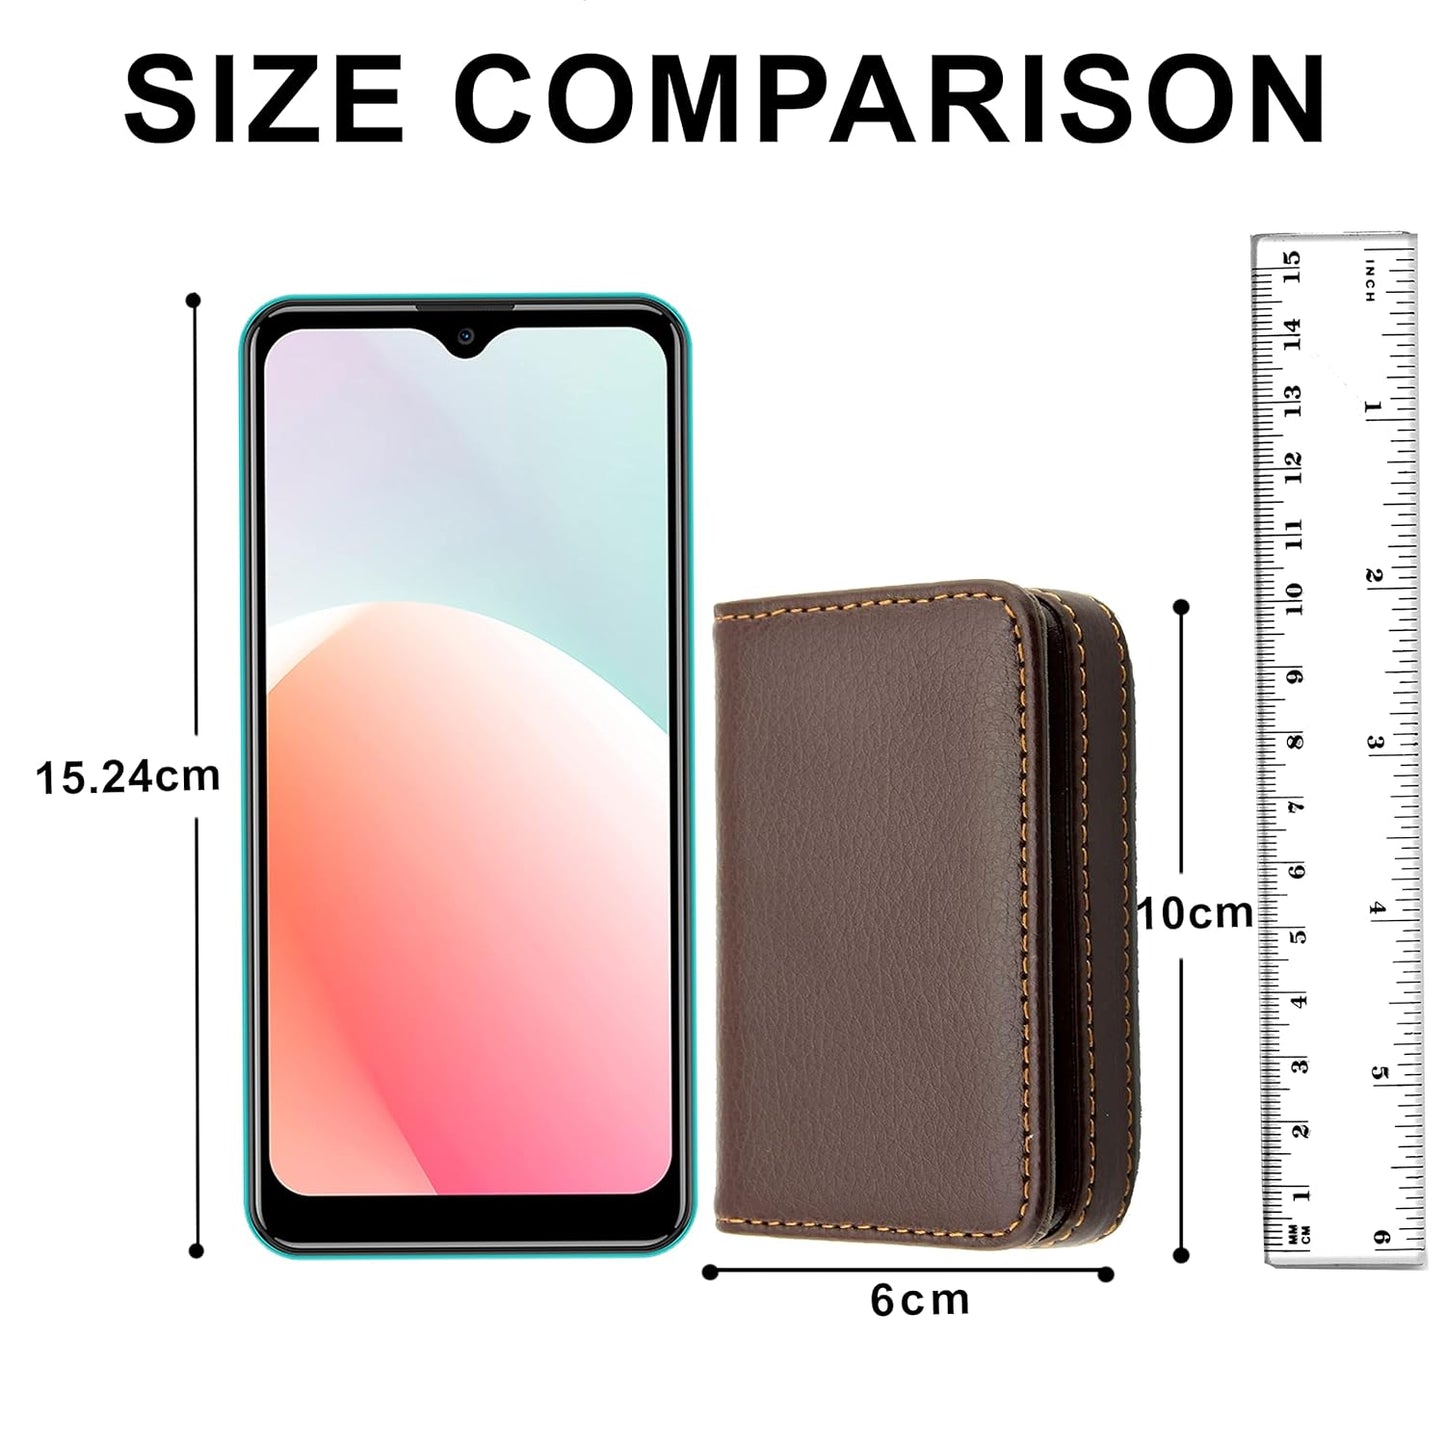 Pocket Sized Stitched PU Leather Credit Card Holder Visiting Business Card Case Wallet with Magnetic Shut for Men & Women (10 x 6 x 1.6 cm)(Multi Design & Colour))